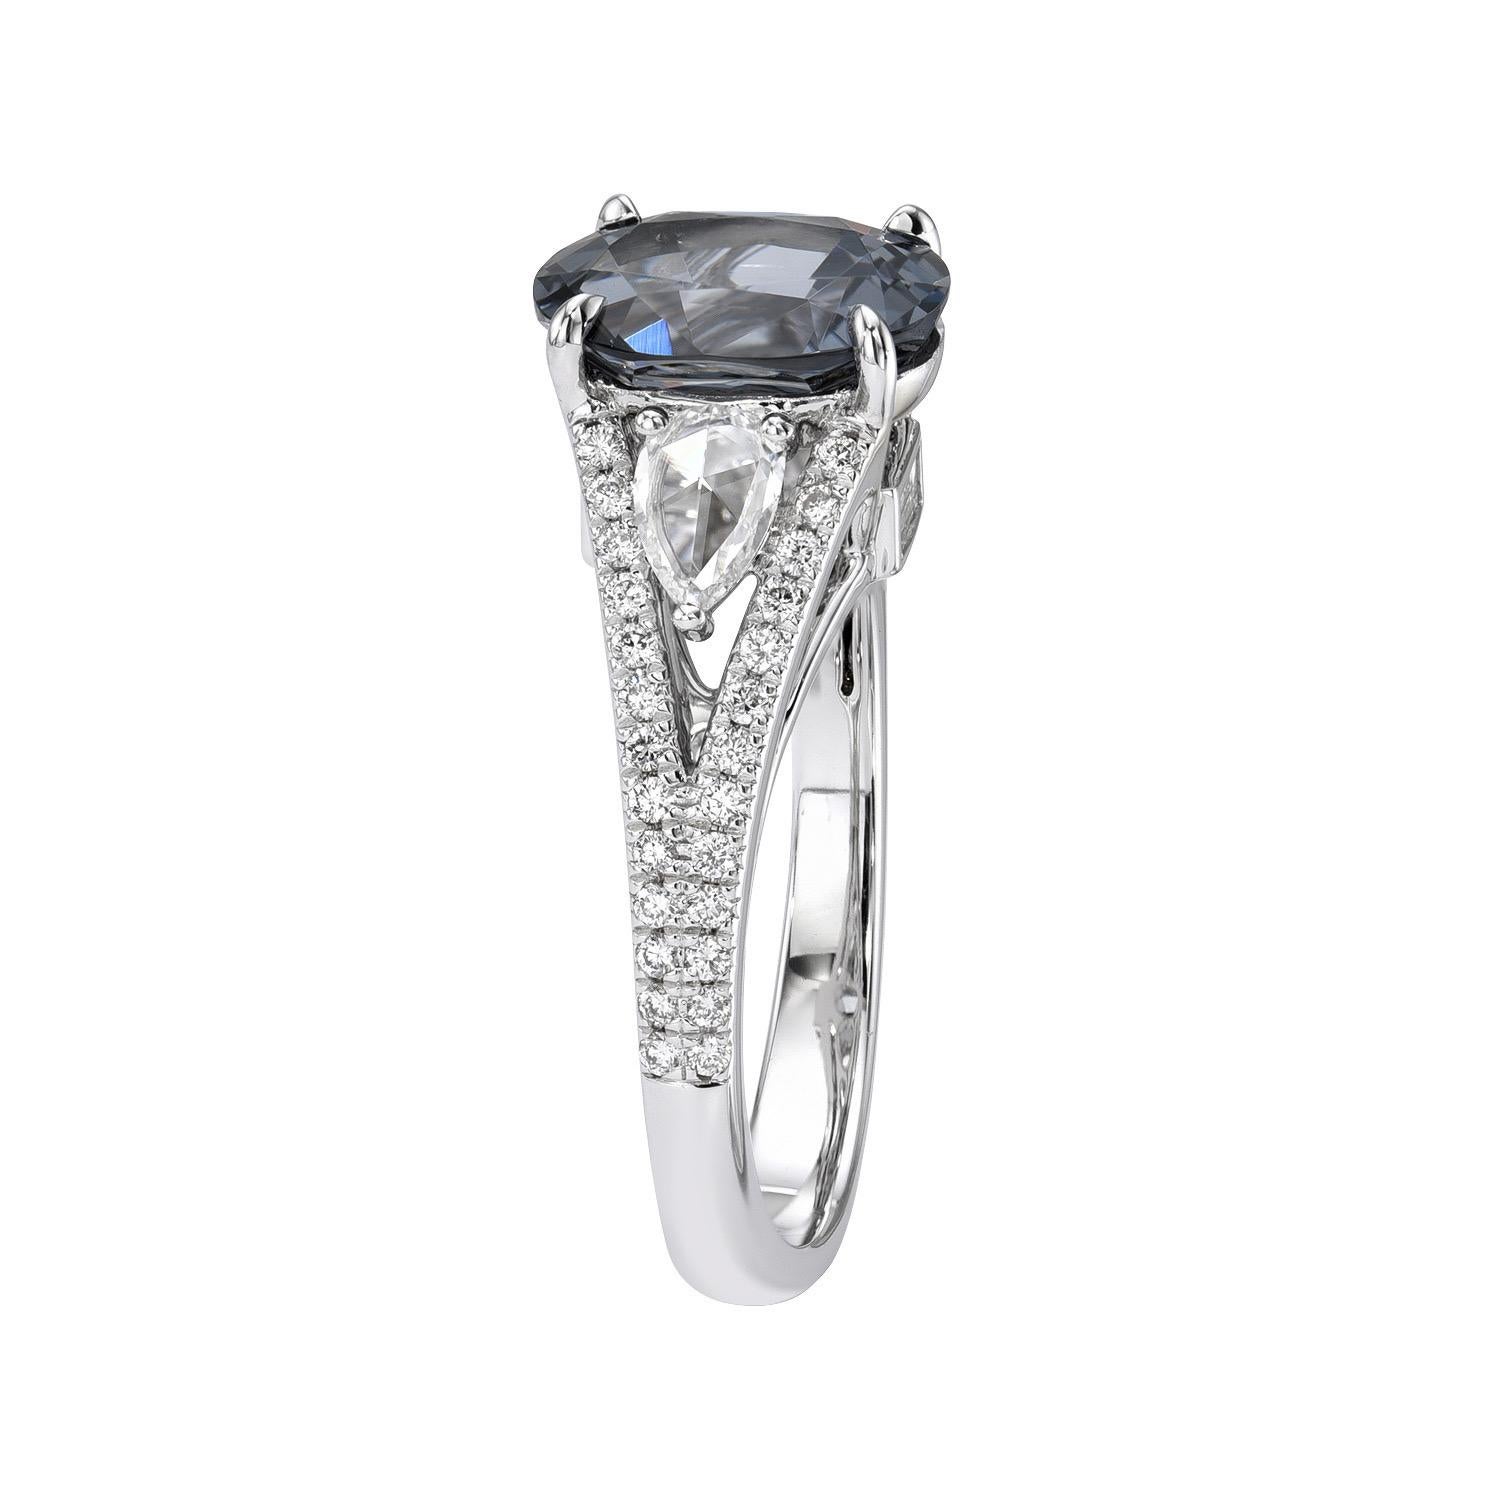 Very unique 2.49 carat Grey Spinel oval, 18K white gold ring, decorated with a total of 0.09 carat baguette diamonds, a pair of 0.23 carat rose-cut pear shape diamonds, and a total of 0.24 carat round brilliant diamonds.
Ring size 6.5. Resizing is